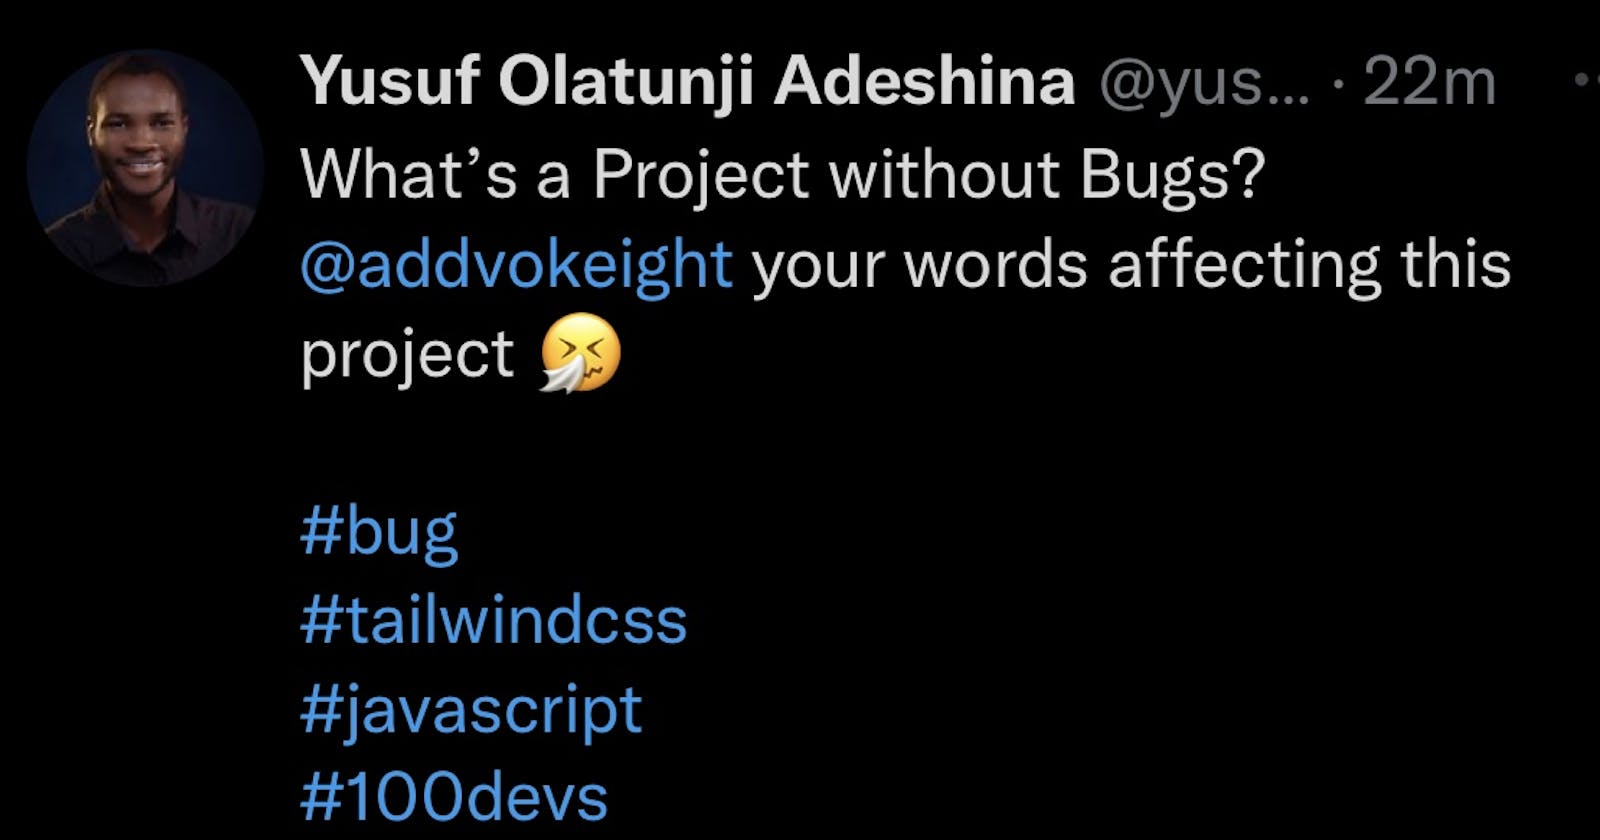 What is a Project without Bugs?